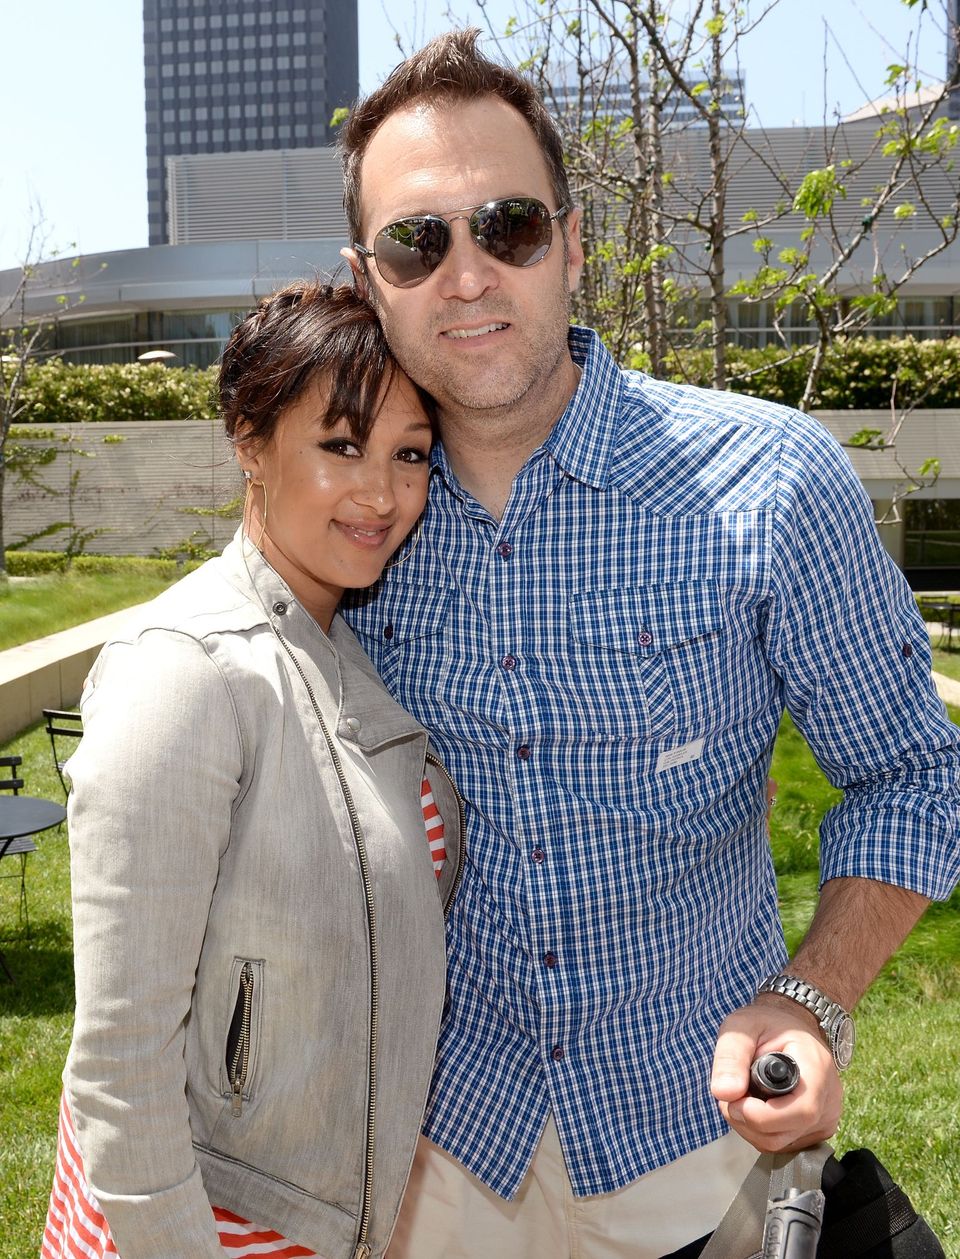 Tamera Mowry-Housley and Adam Housley at the Elizabeth Glaser Pediatric AIDS Foundation's 24th Annual "A Time For Heroes" at Century Park on June 2, 2013 in Los Angeles, California | Photo: Getty Images